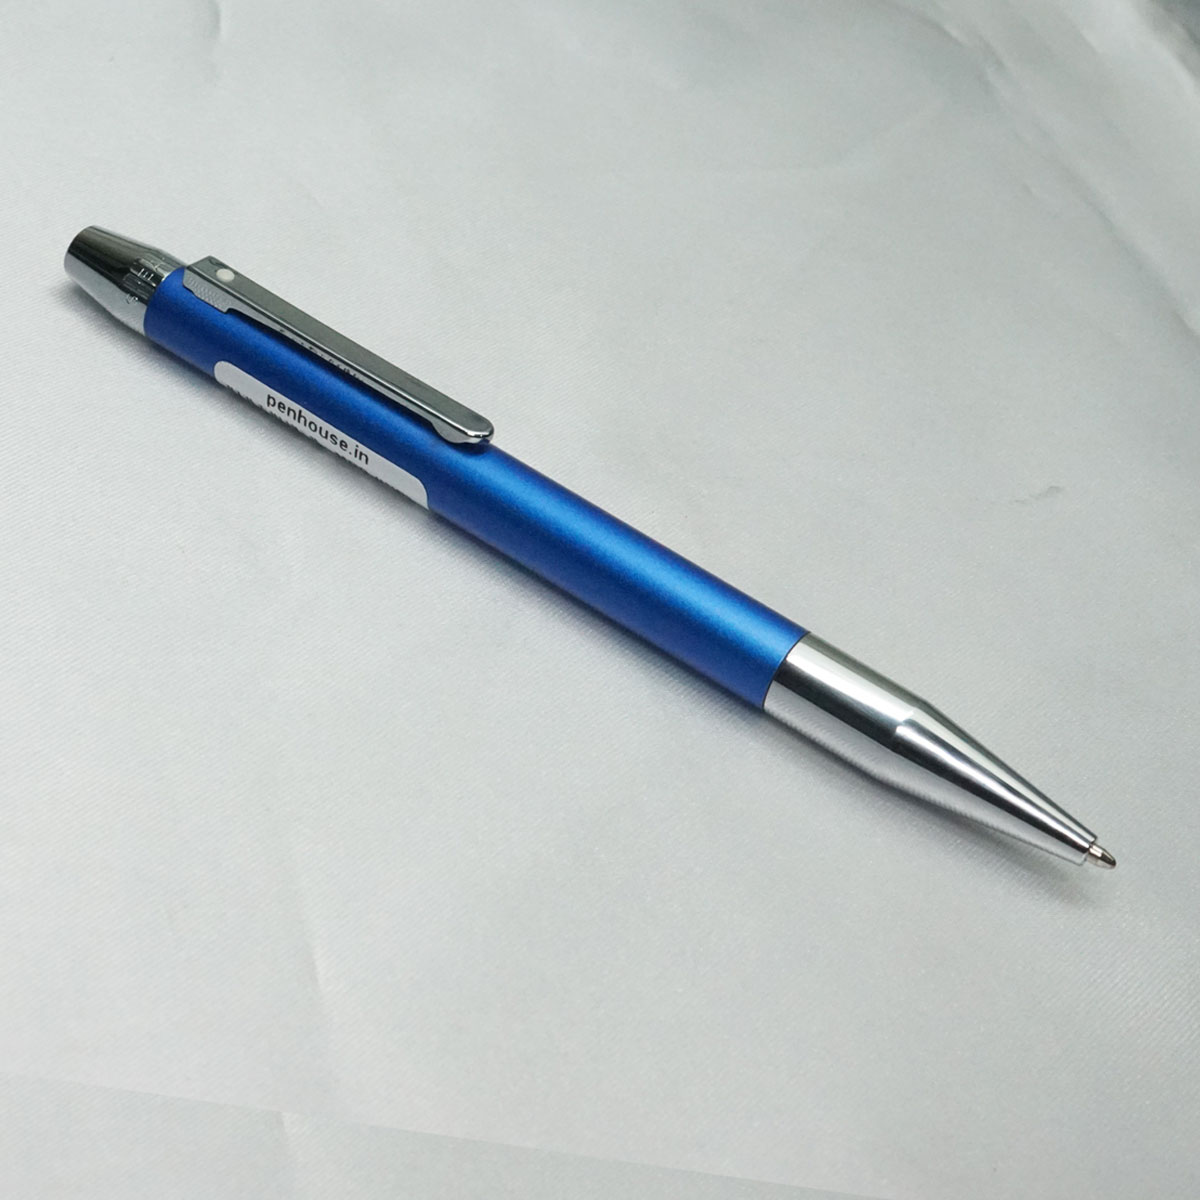 Sheaffer New Blue Color Body with Silver Trims Twist Type ball Pen SKU 21793